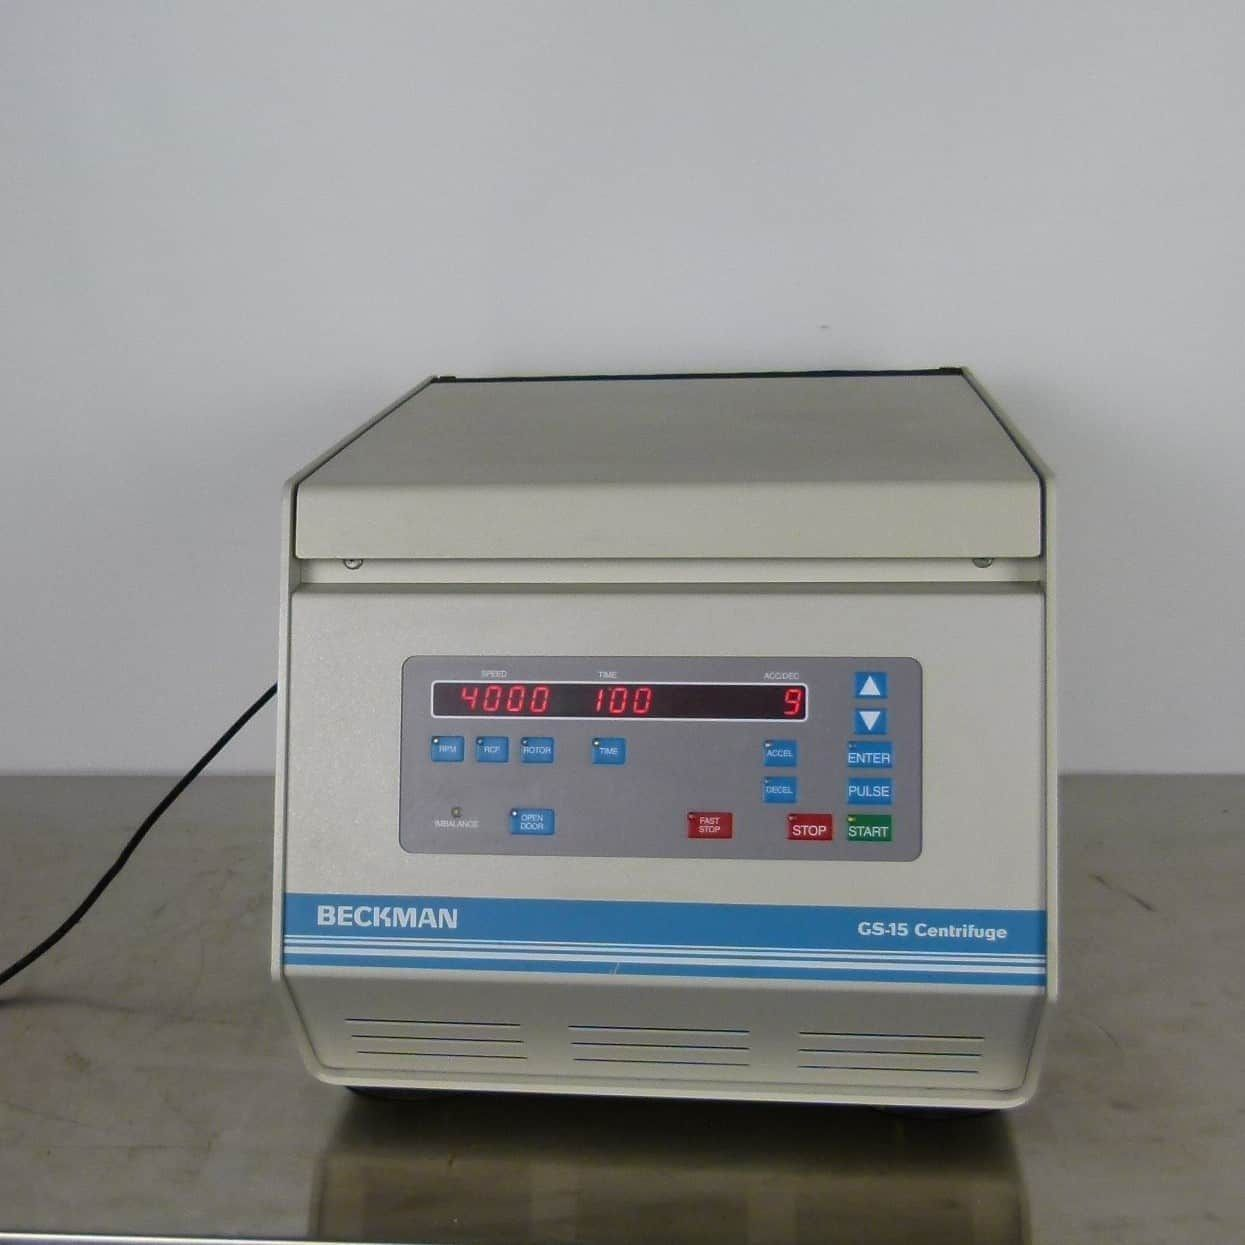 Beckman GS-15 Benchtop Centrifuge with Fixed Angle Rotor